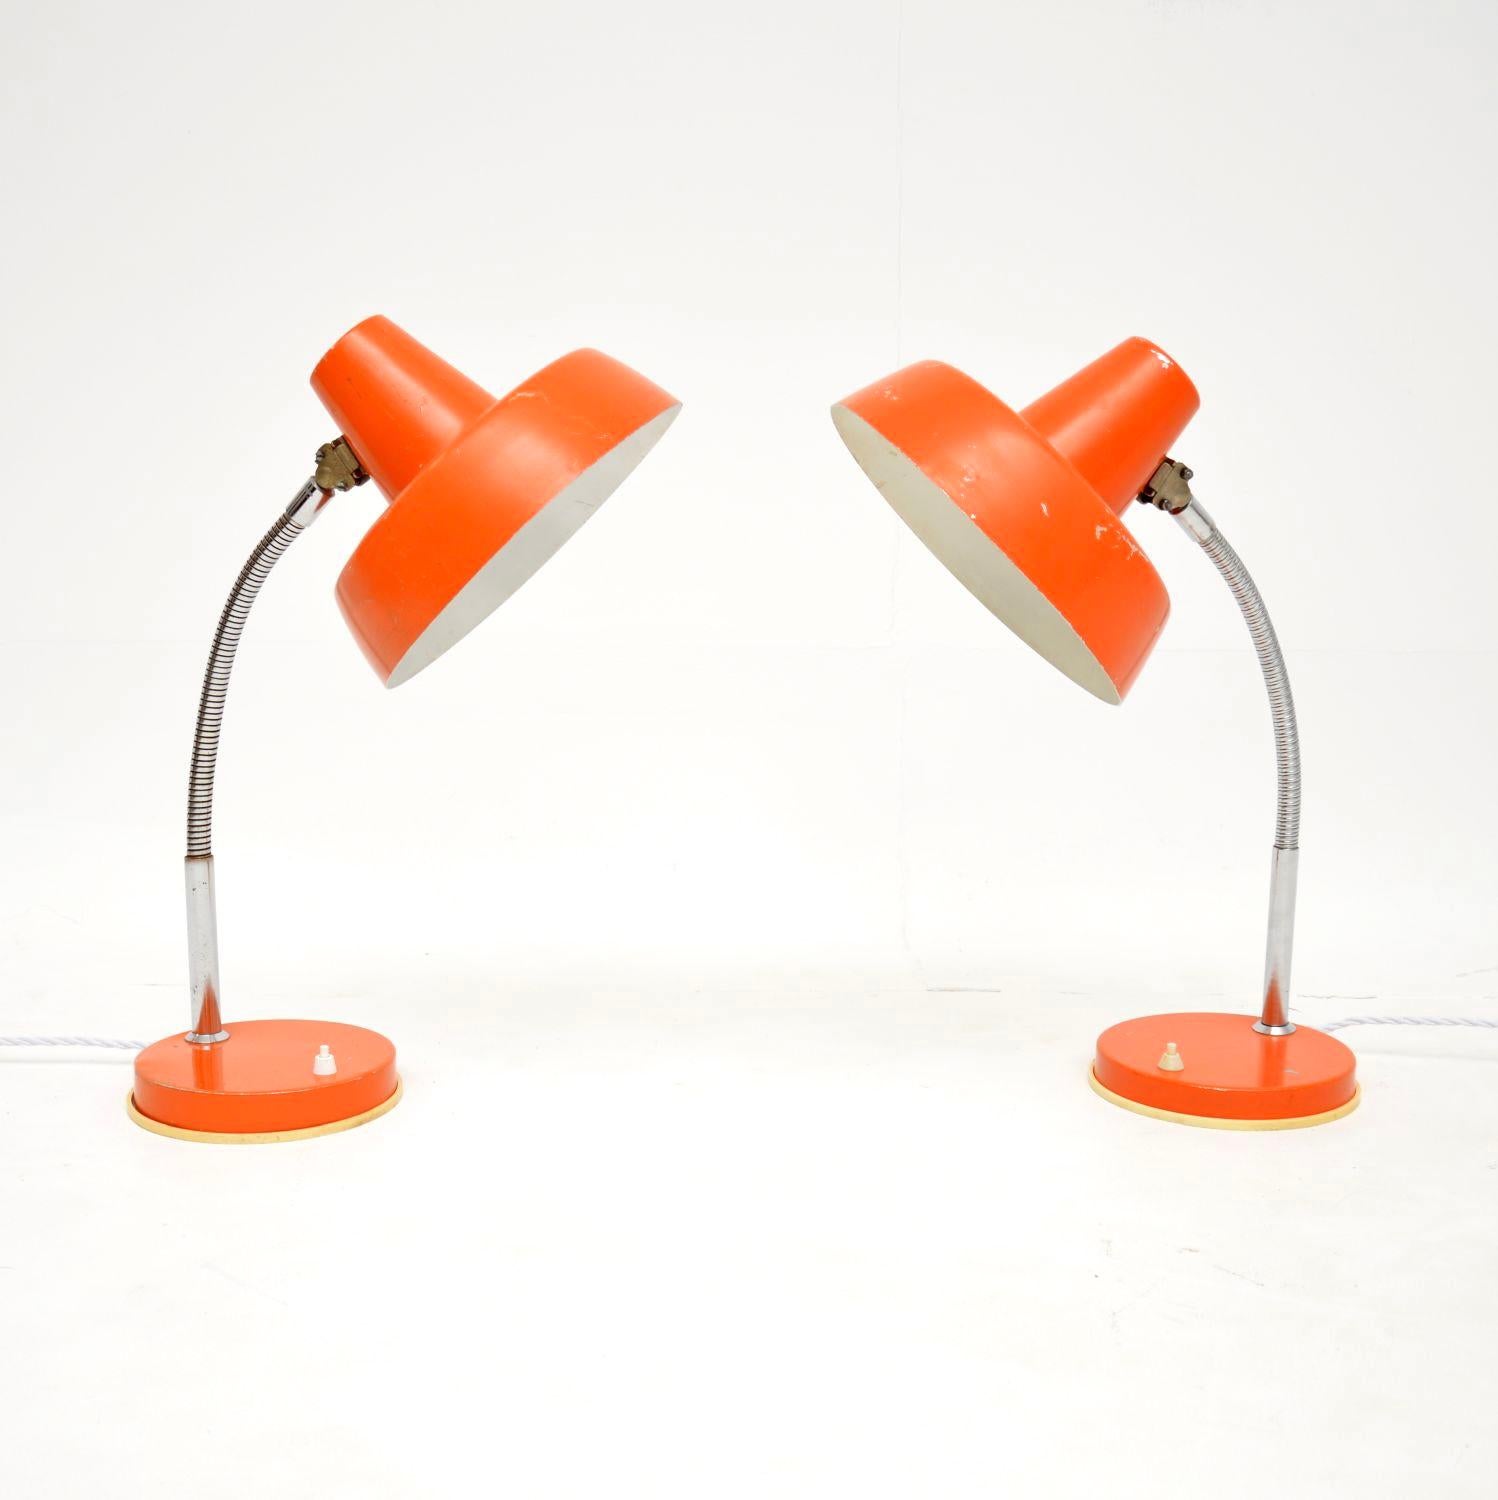 A superb pair of vintage table lamps, beautifully finished in orange. They were made in Germany, and they date from the 1960’s.

The quality is fantastic, these are very useful and could be used as desk lamps, or even as bedside lamps.

We have had